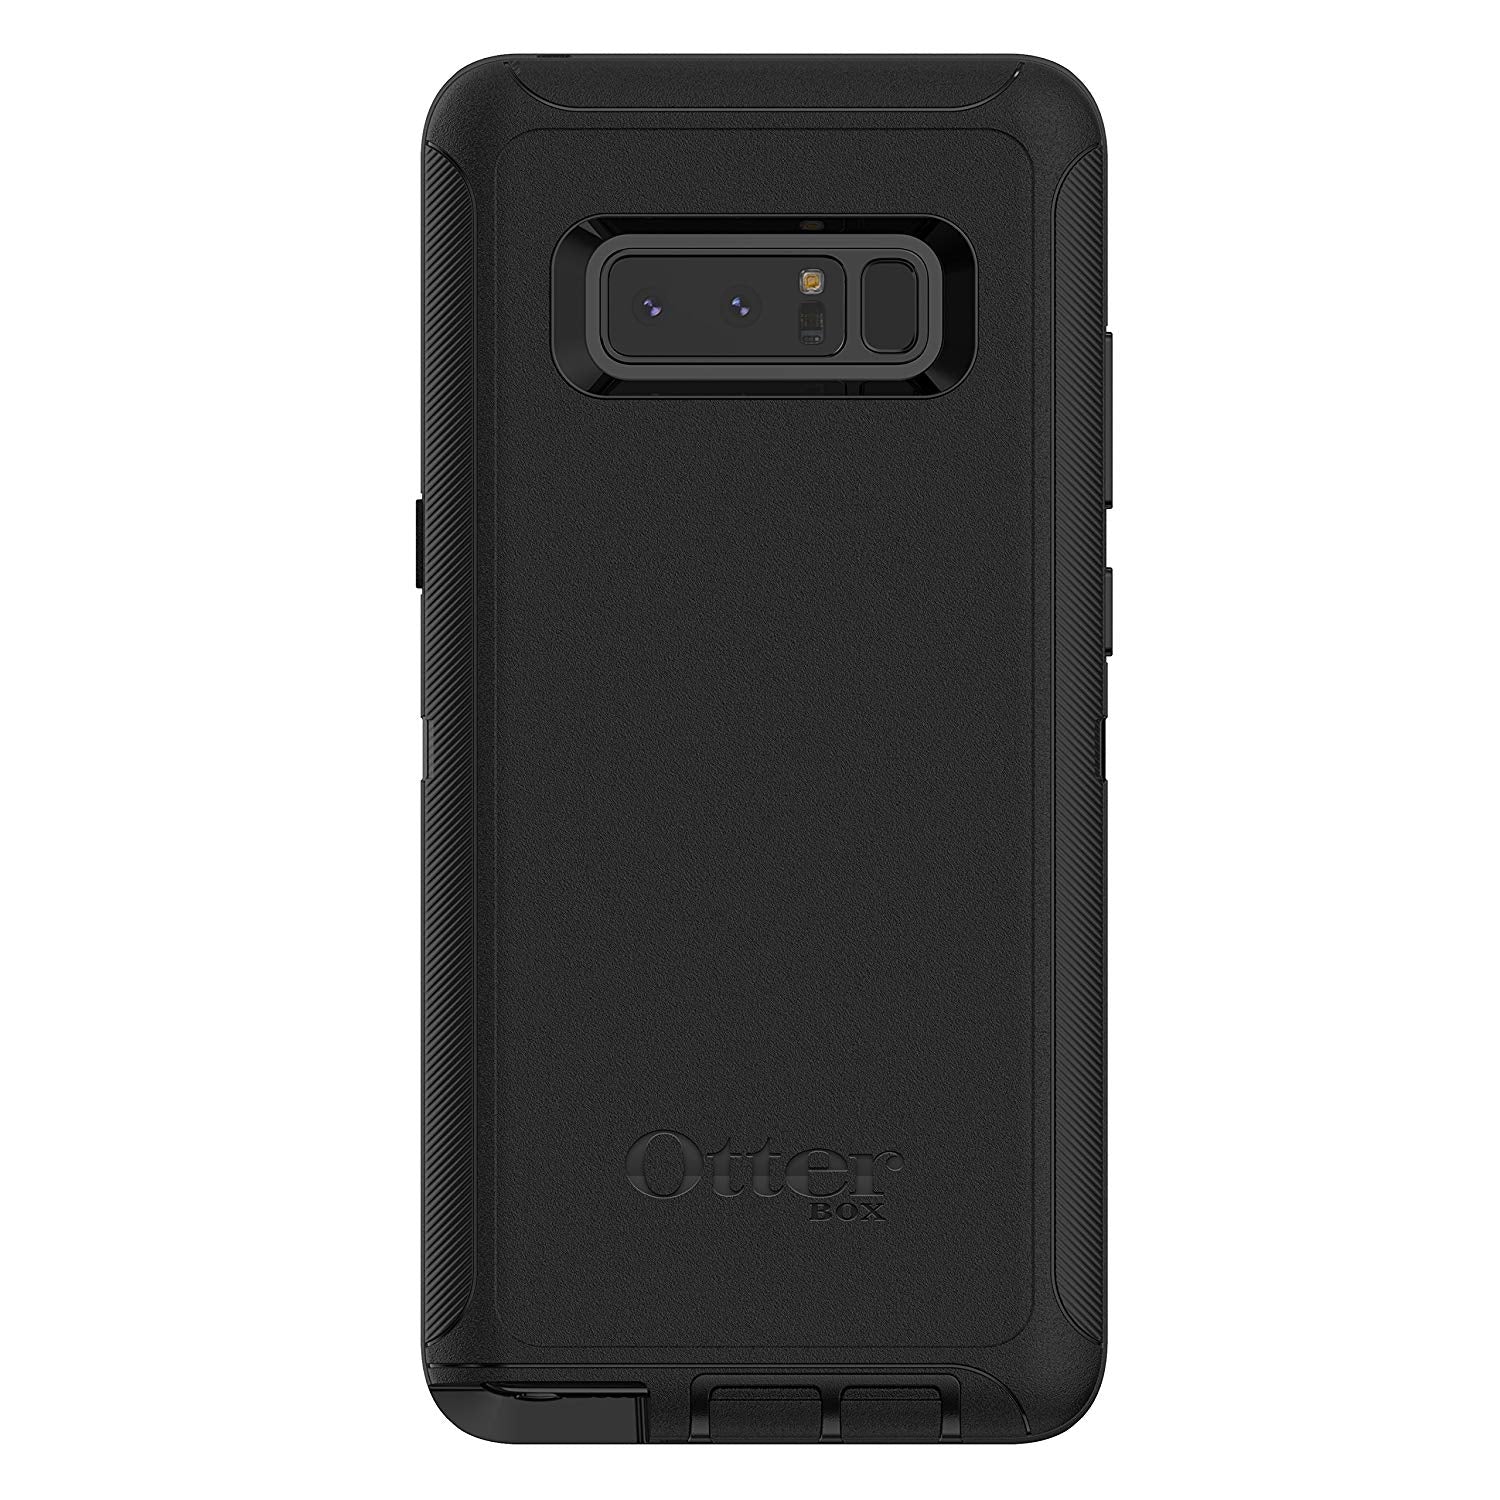 OtterBox DEFENDER SERIES Case &amp; Holster for Galaxy Note8 - Black (New)